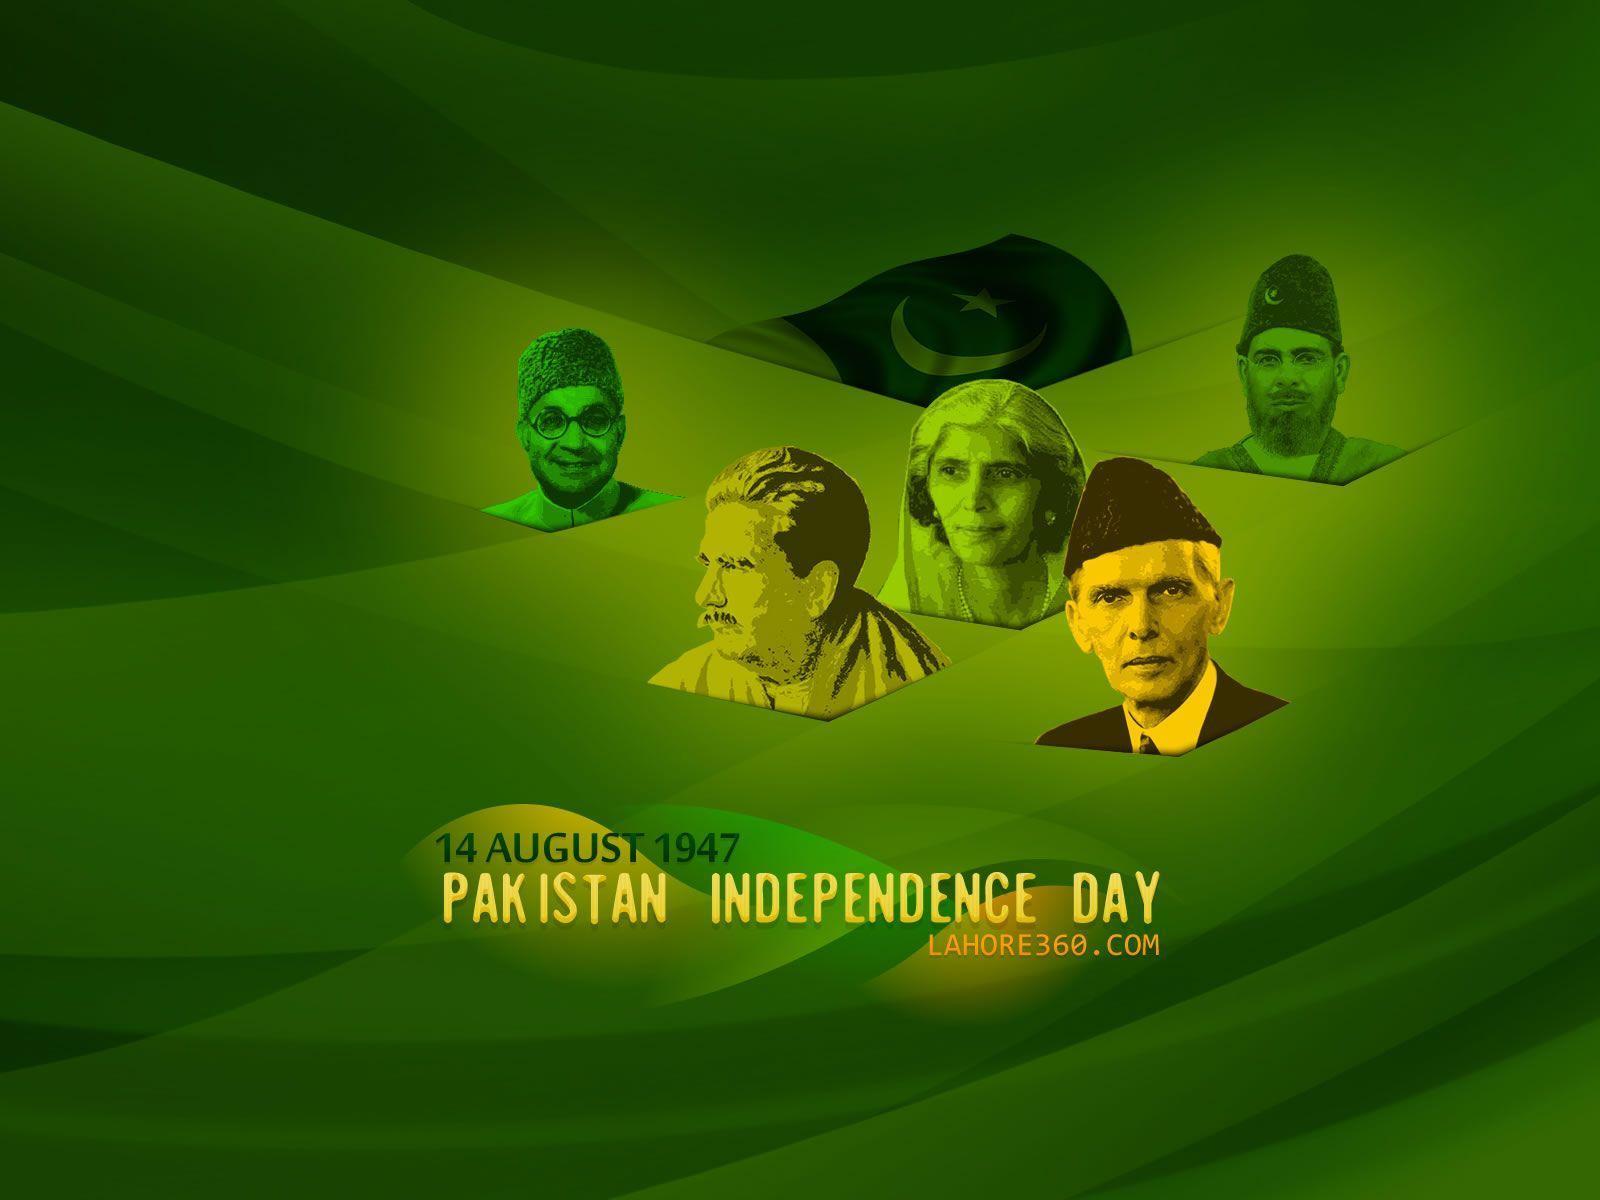 Pakistan Independence Day Wallpaper, Lahore